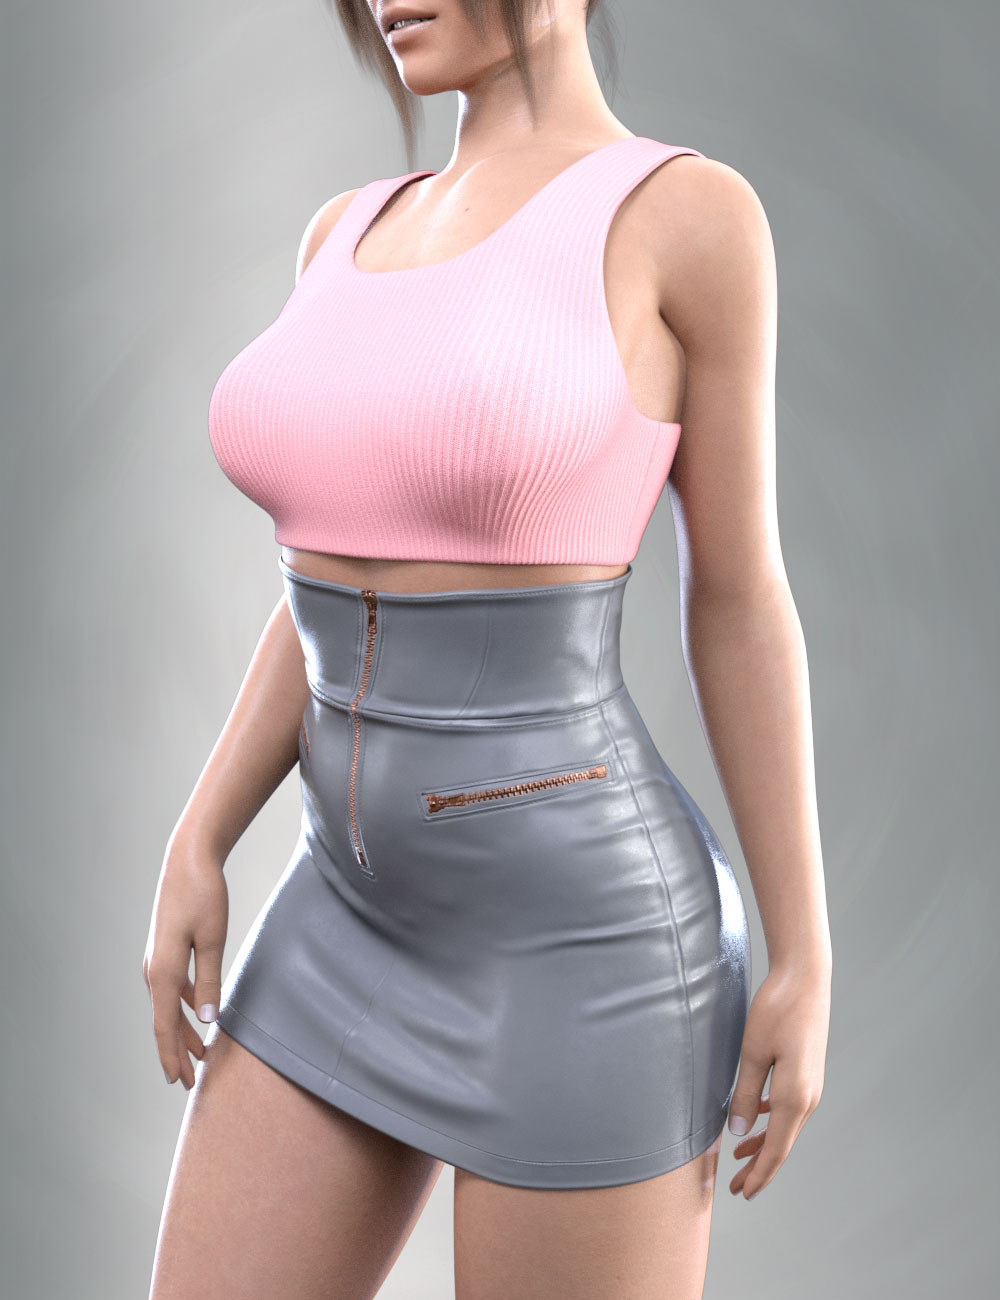 dForce COG Crop Top With Leather Skirt for Genesis 8 and 8.1 Females by: CatOnGlade, 3D Models by Daz 3D